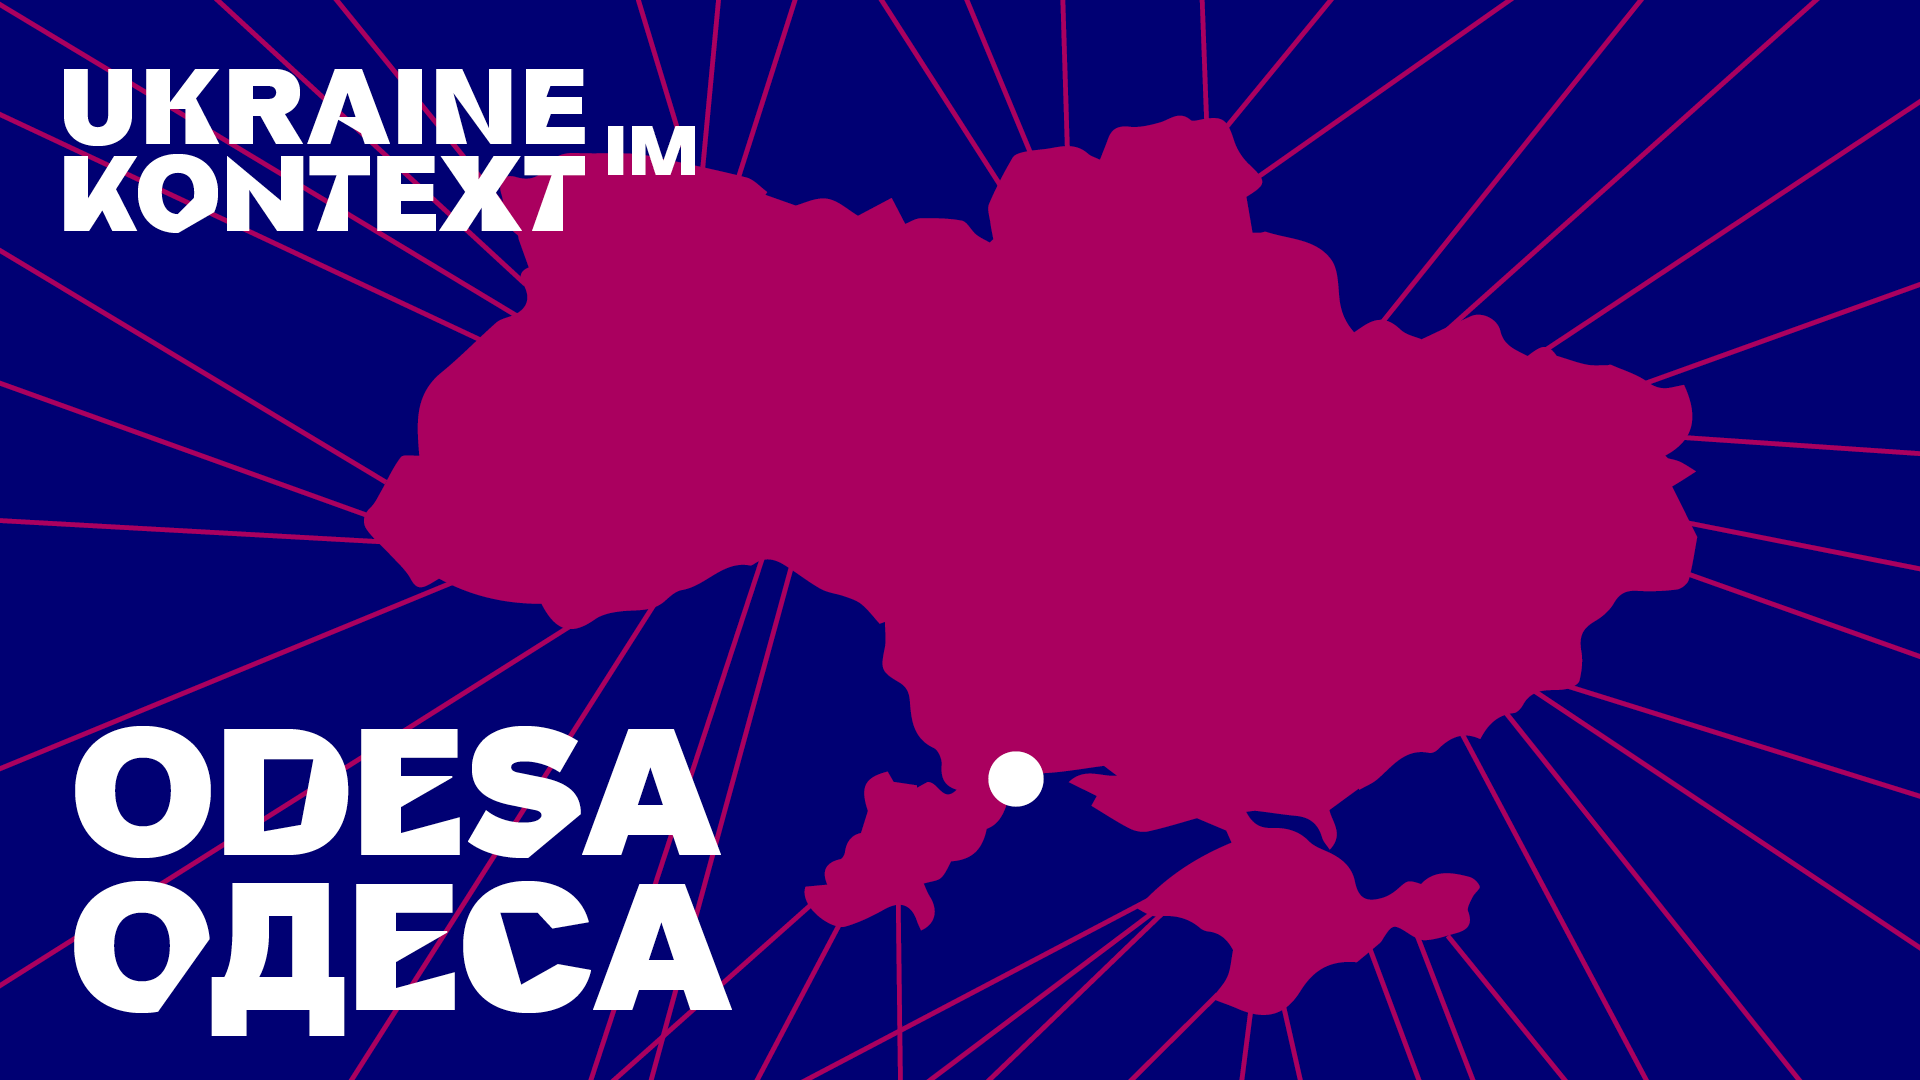 Graphic: The shape of Ukraine in berry color on dark blue background.